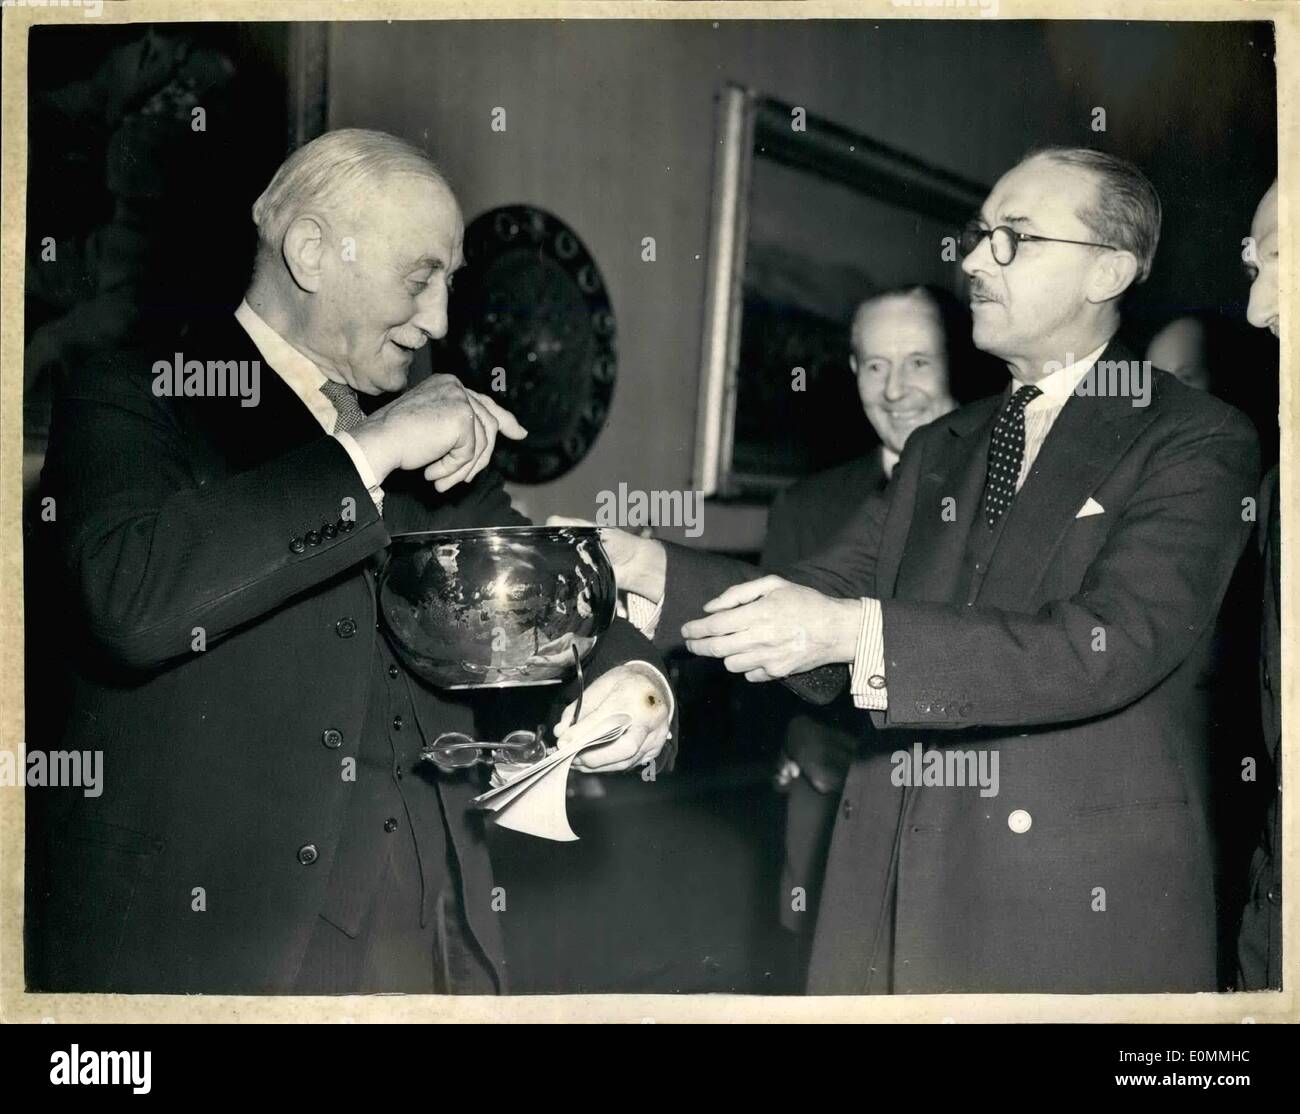 Mar. 03, 1956 - The C.I.G.S. Opens ''Tradition in Silver'' Exhibition. The Silver Chamber Pot... The Chief of the Imperial General Staff General Sir Gerald Templer this morning opened the ''Tradition in Silver'' exhibition of silver pieces from officers' messes of the three services - at the Royal Academy... The exhibition has been arranged by the Soldiers' Sailors' and Airmen's Family Association.. Stock Photo